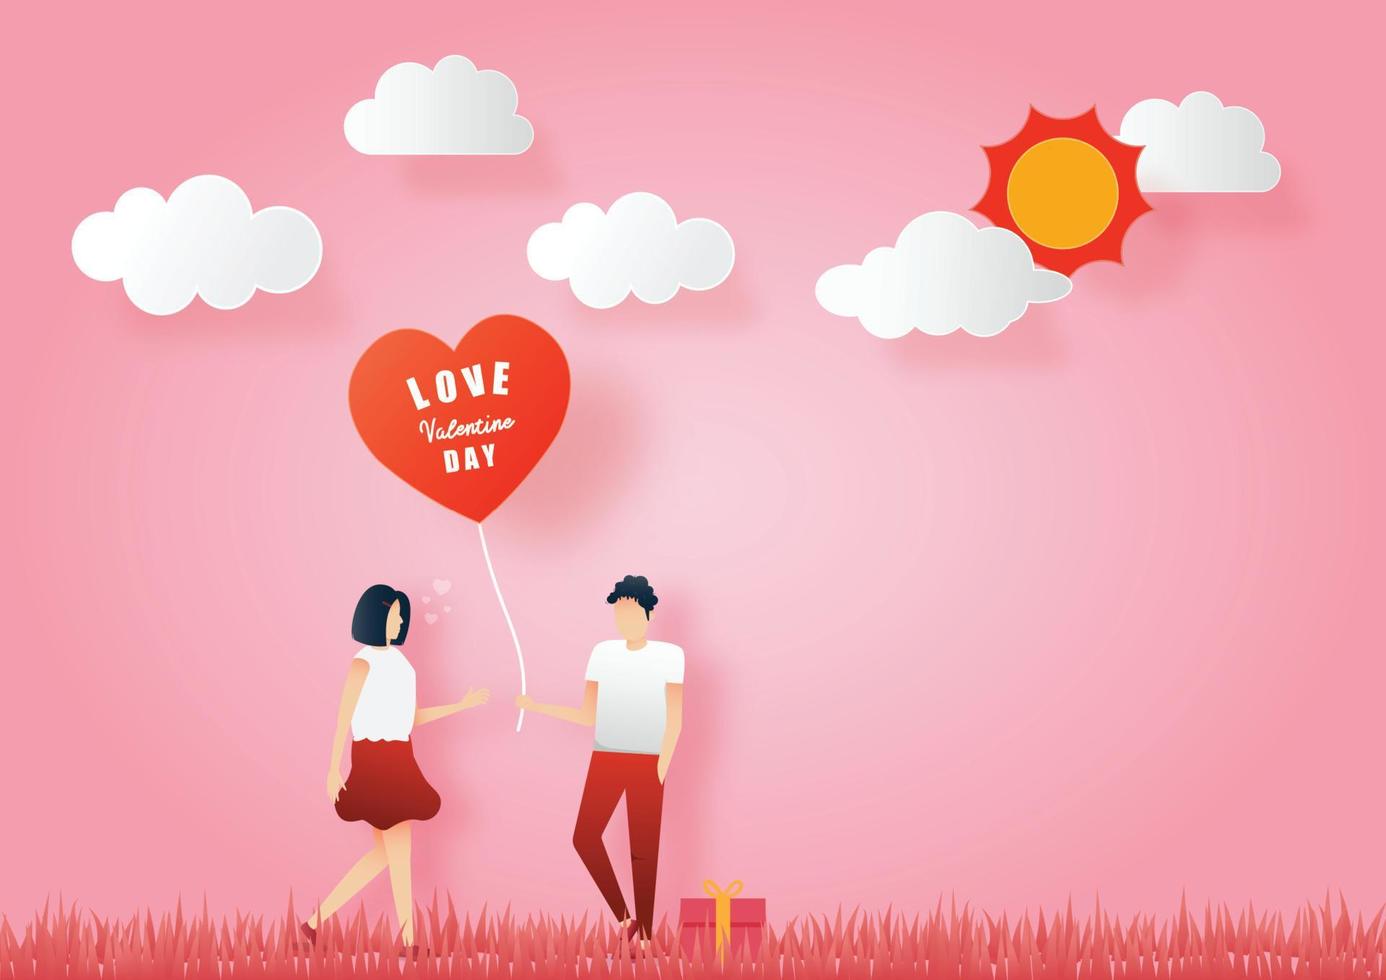 Concept of valentine day. Men give paper hearts to women. Vector paper art illustration. Paper cut and craft style.